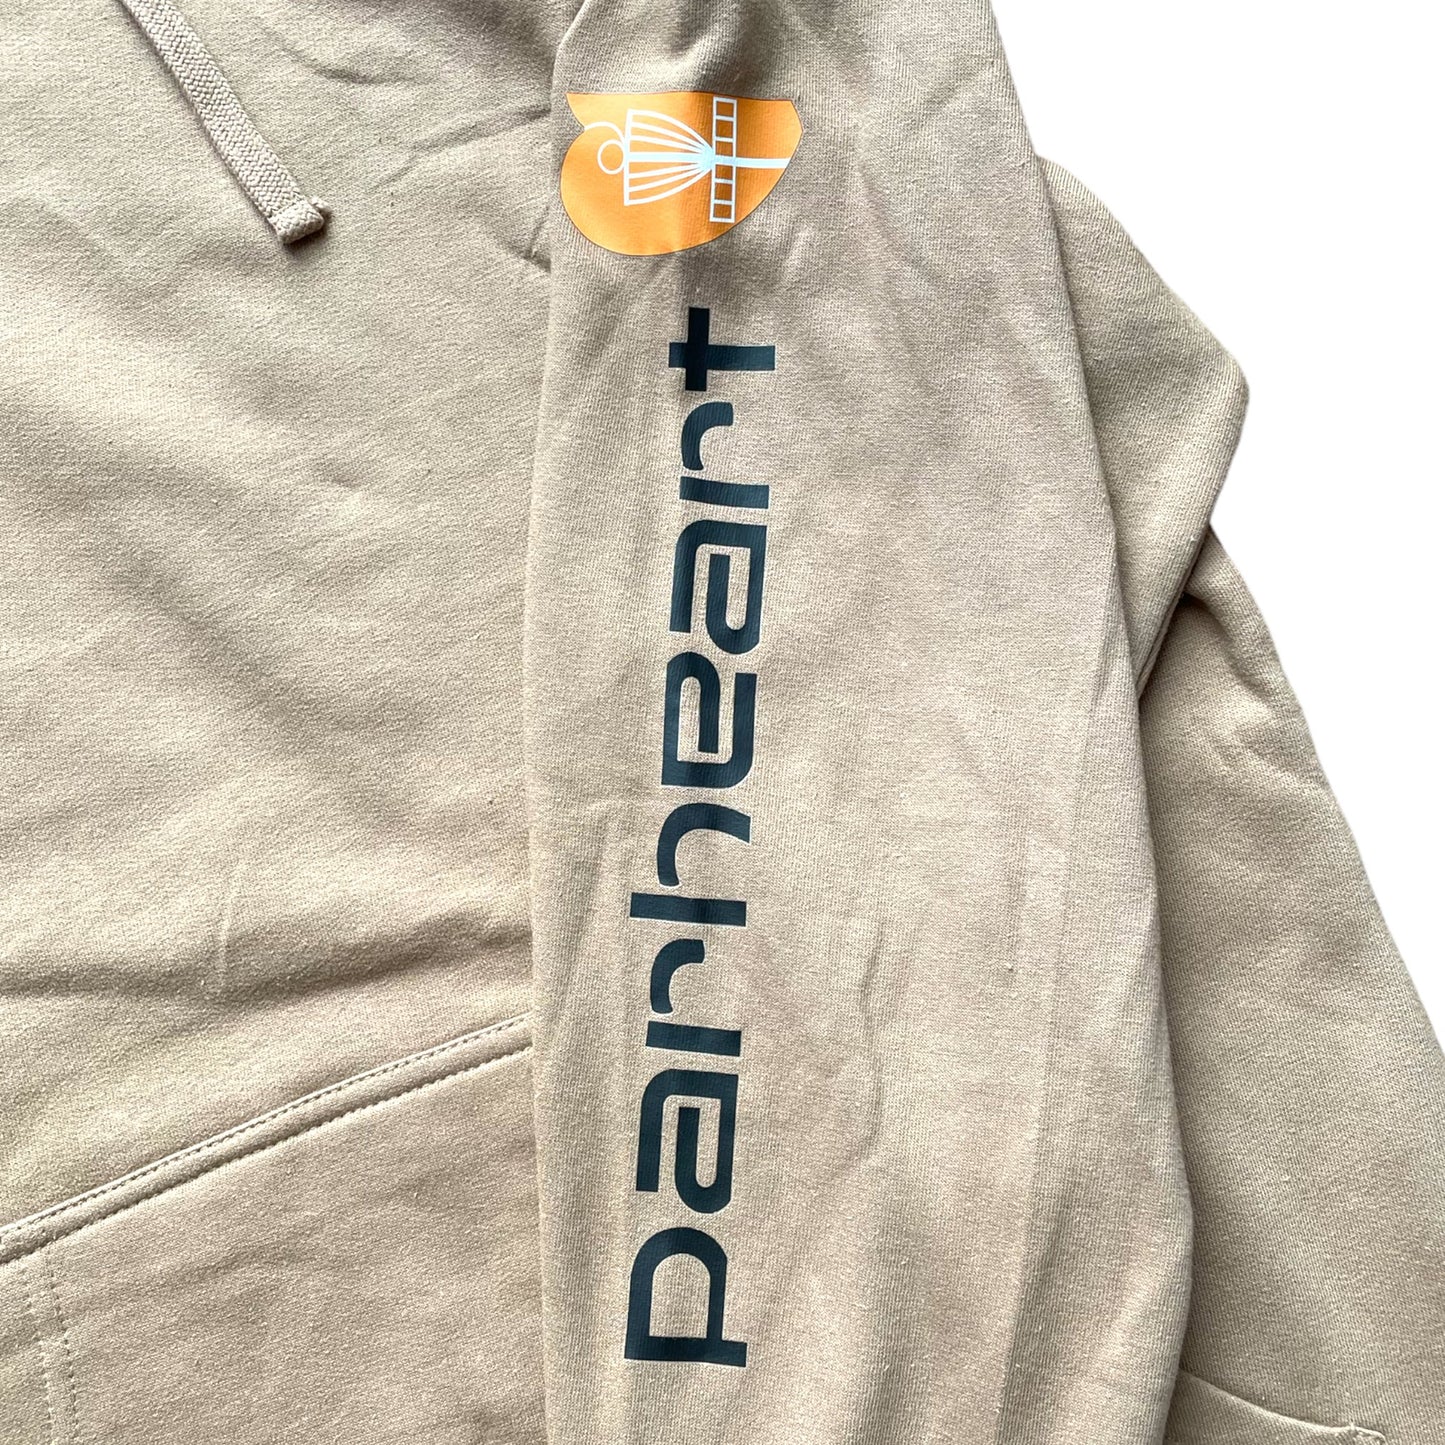 Perks and Re-creation Parheart Hoodie Disc Golf